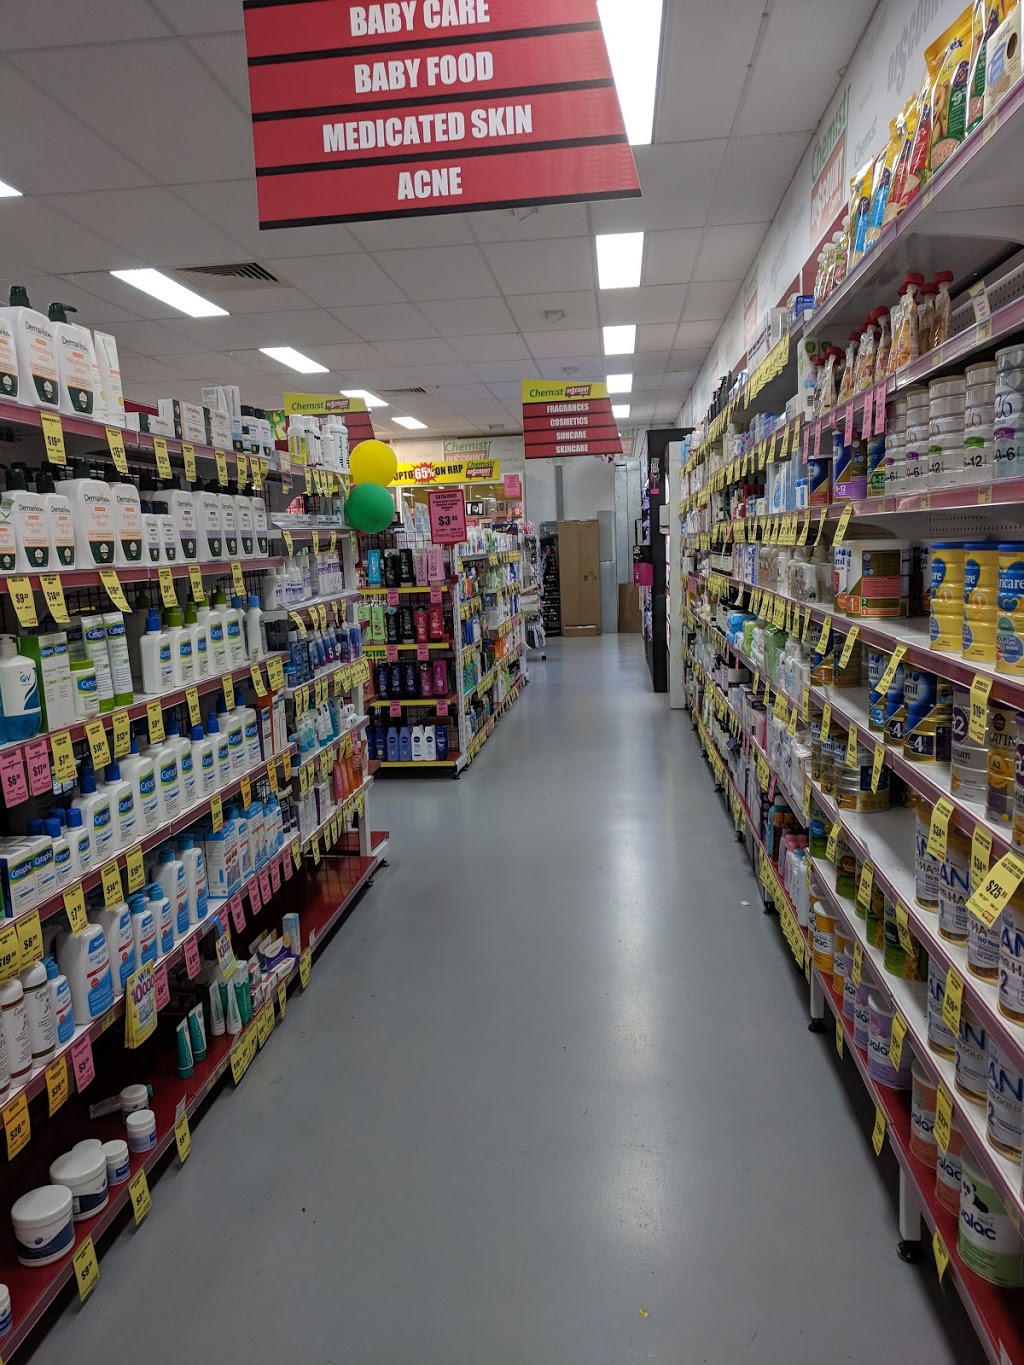 Chemist Discount Centre Laurimar | pharmacy | 126 Painted Hills Rd, Doreen VIC 3754, Australia | 0397171322 OR +61 3 9717 1322